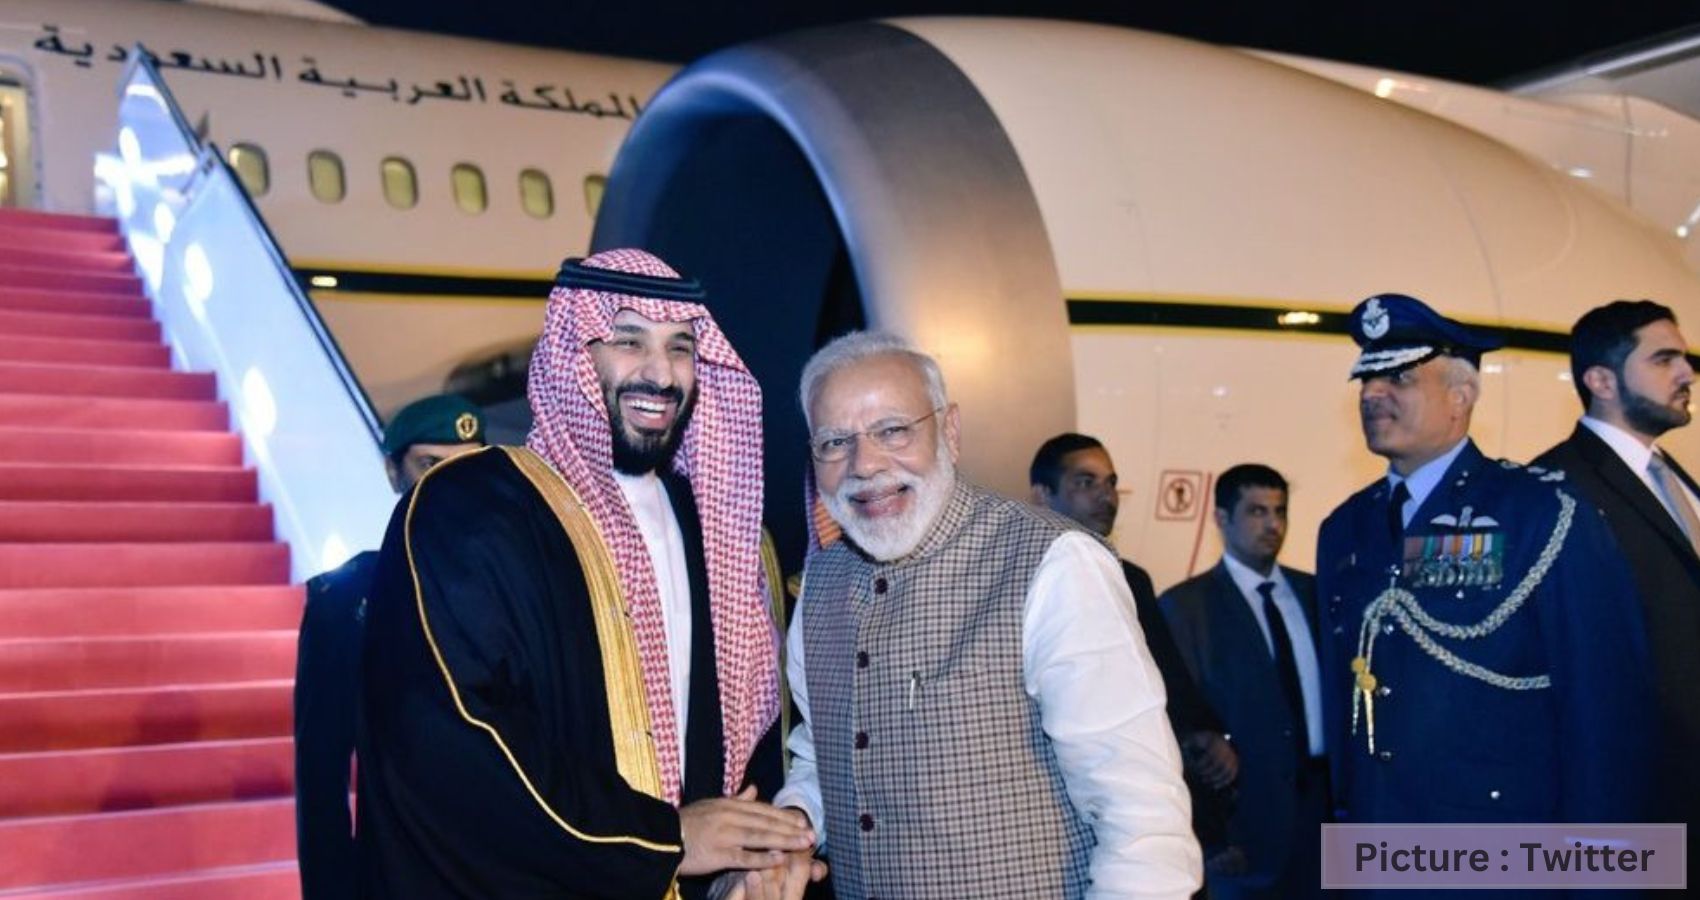 US Cites Immunity Given To Modi While Justifying The Same For Mohammed Bin Salman